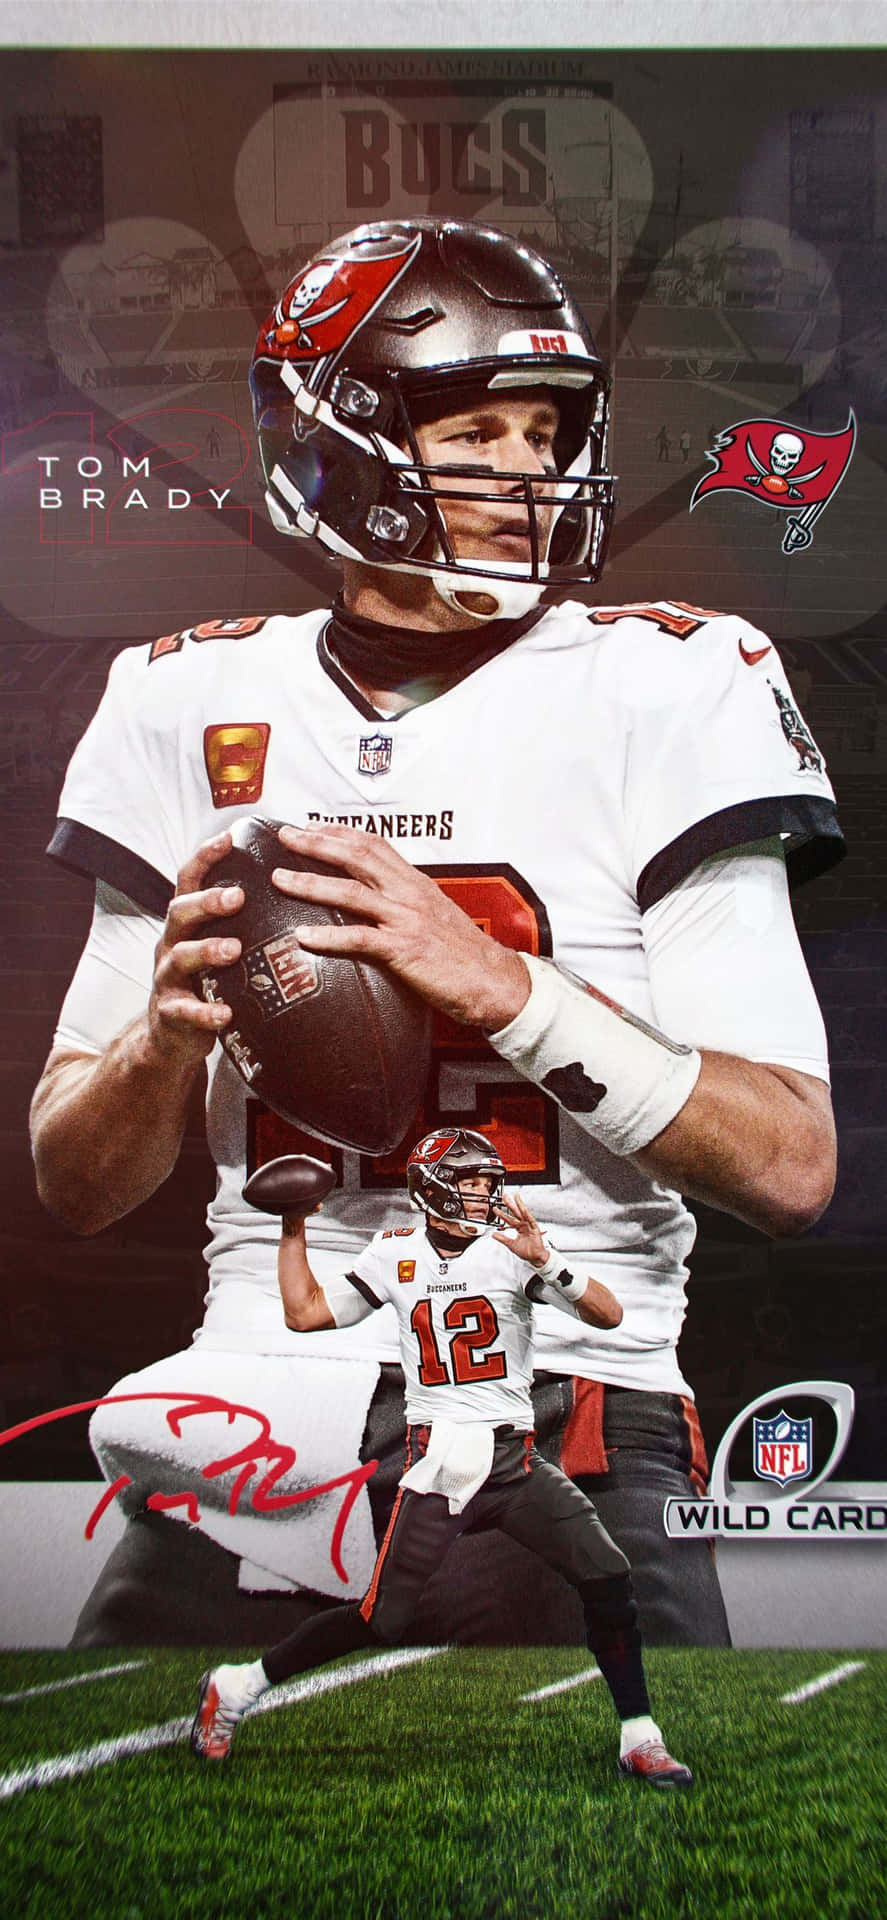 The Tampa Bay Buccaneers Reimagined on an iPhone Wallpaper